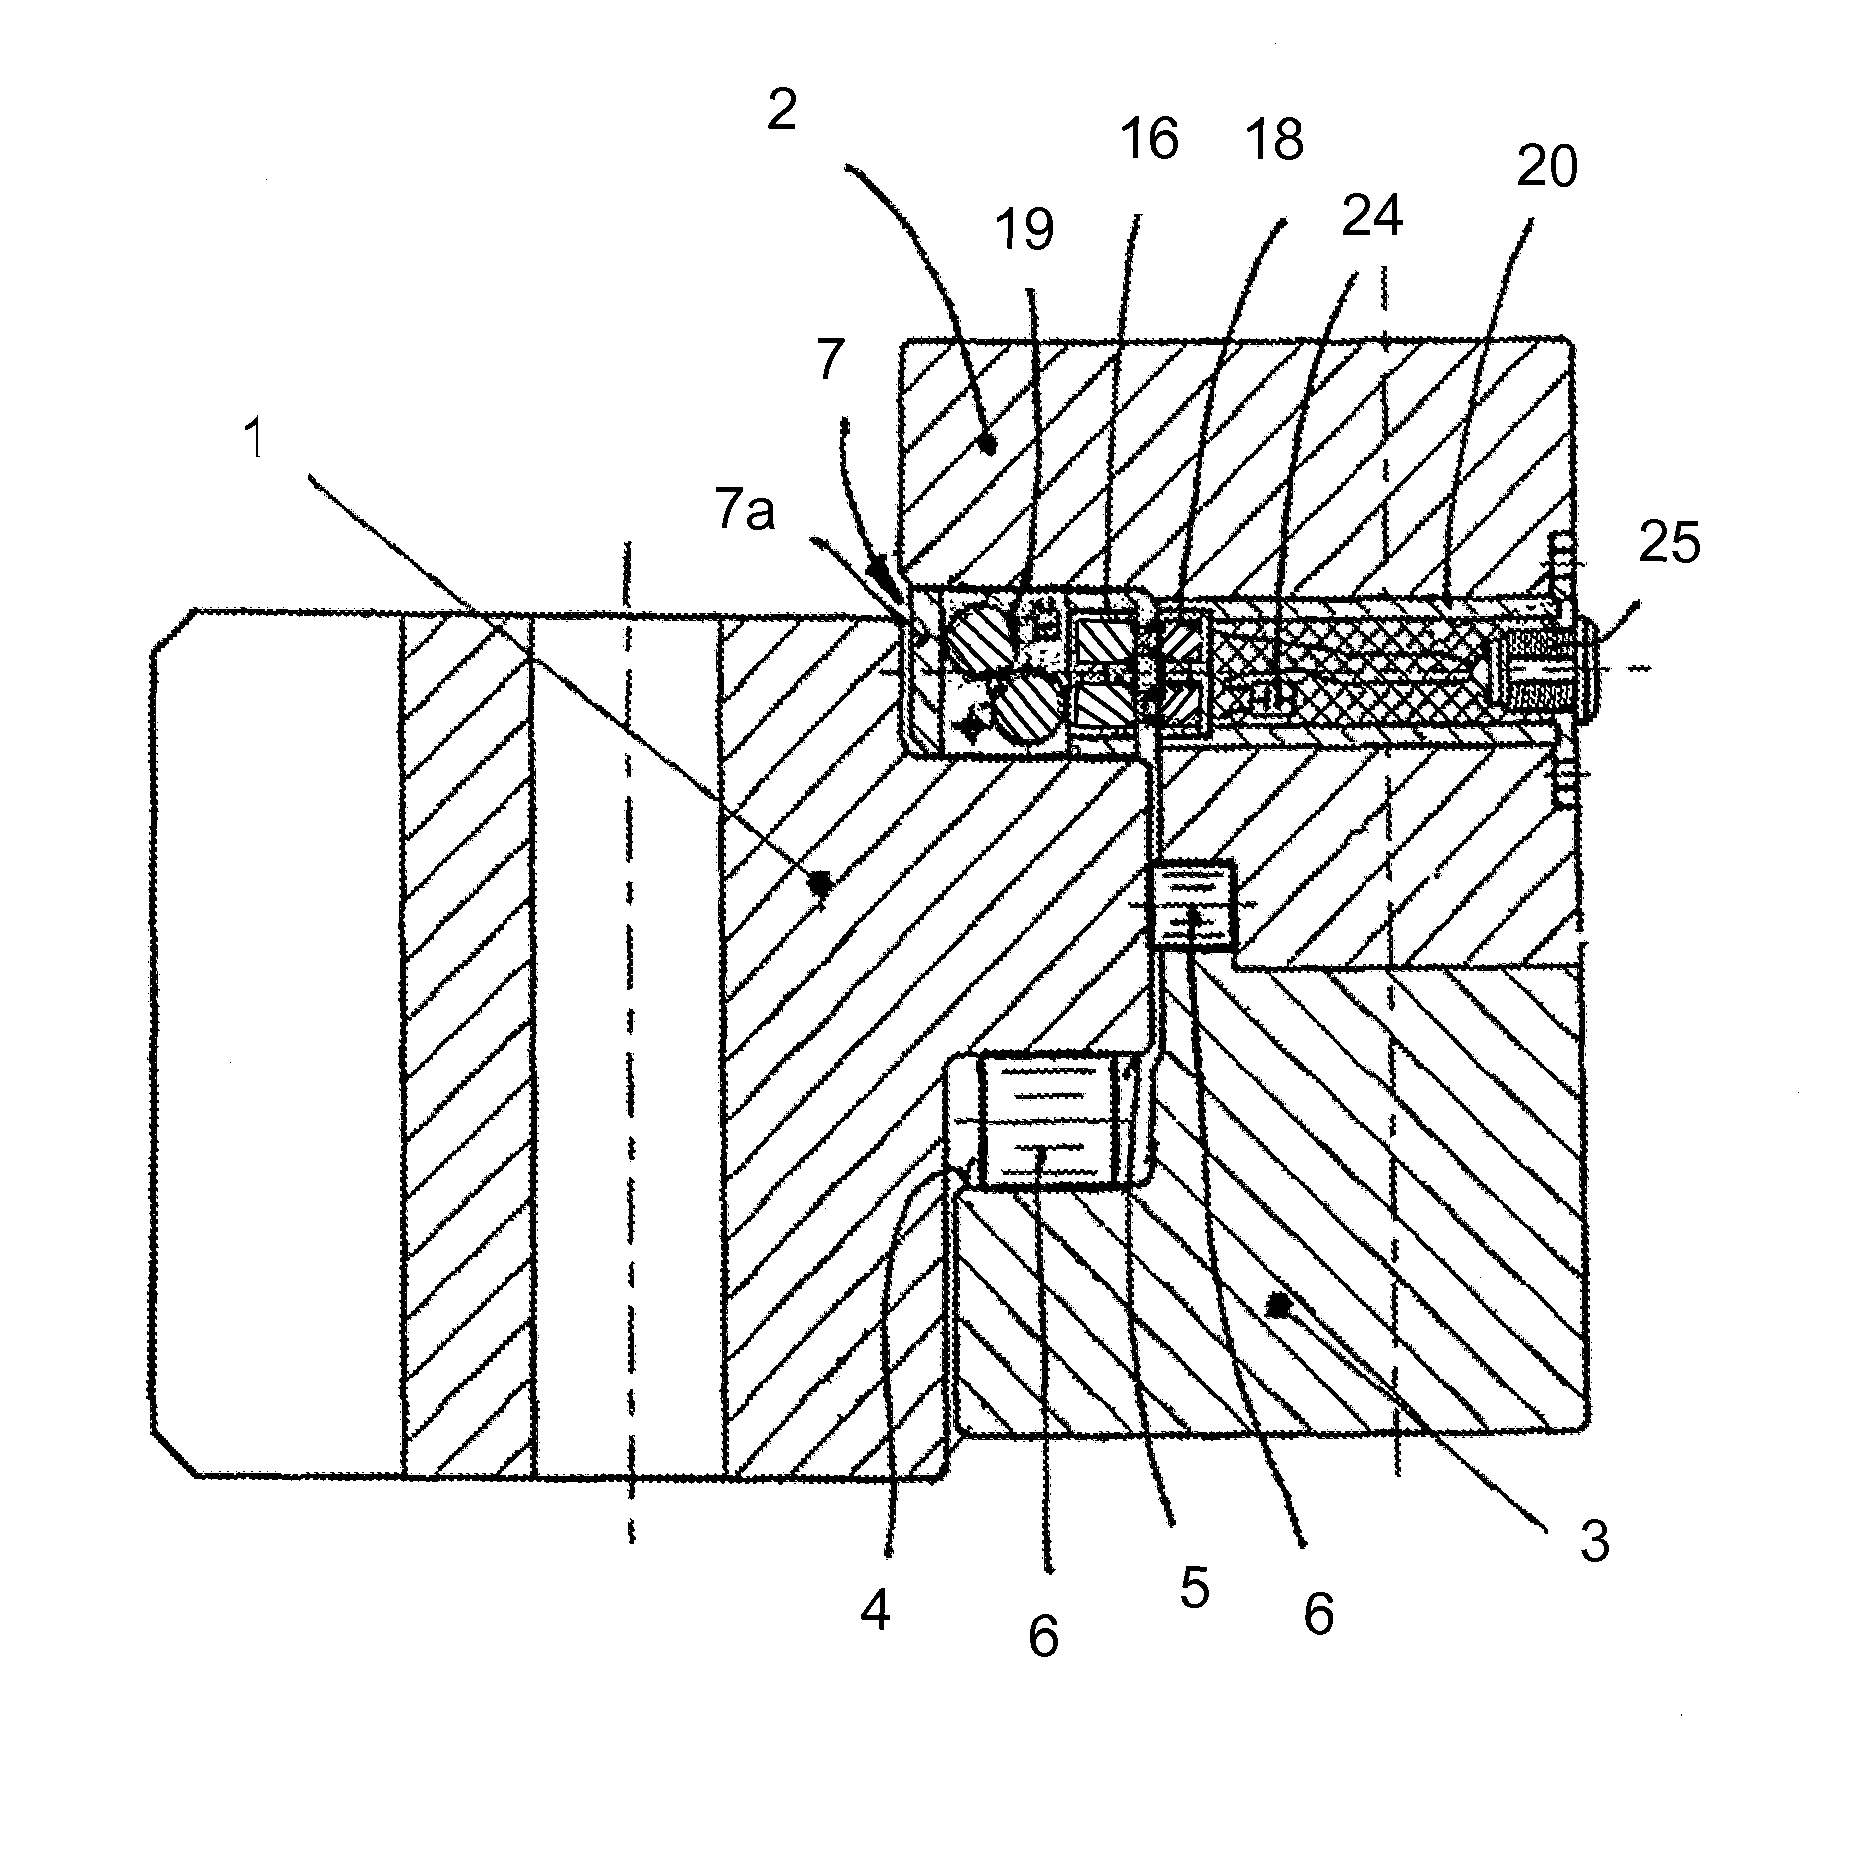 Device for detecting and monitoring damage to anti-friction bearings